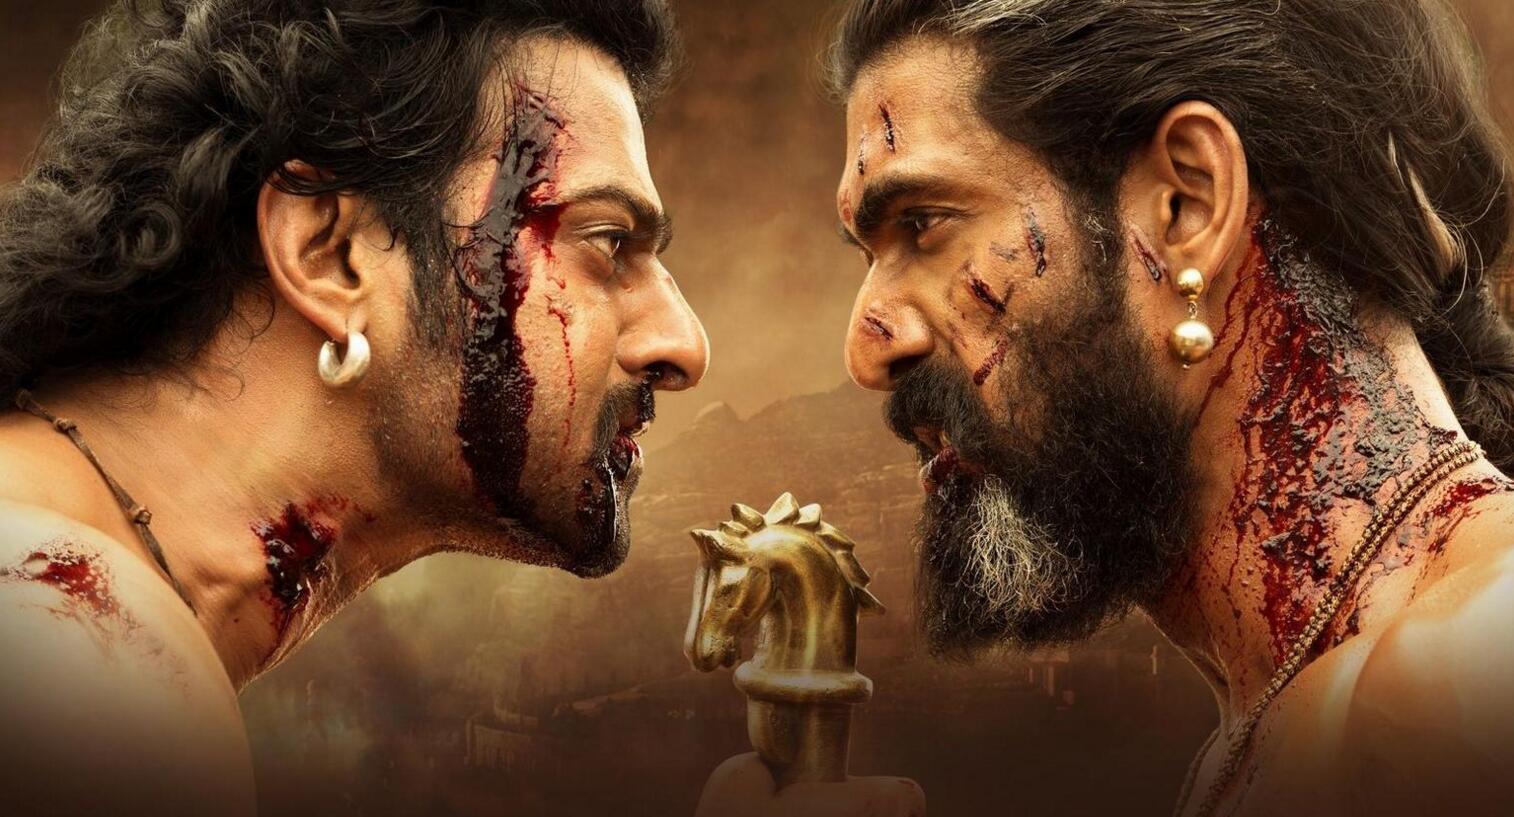 “Baahubali 2: The Conclusion” Rendered by FoxRenderfarm Became The Highest-grossing Indian Film in History